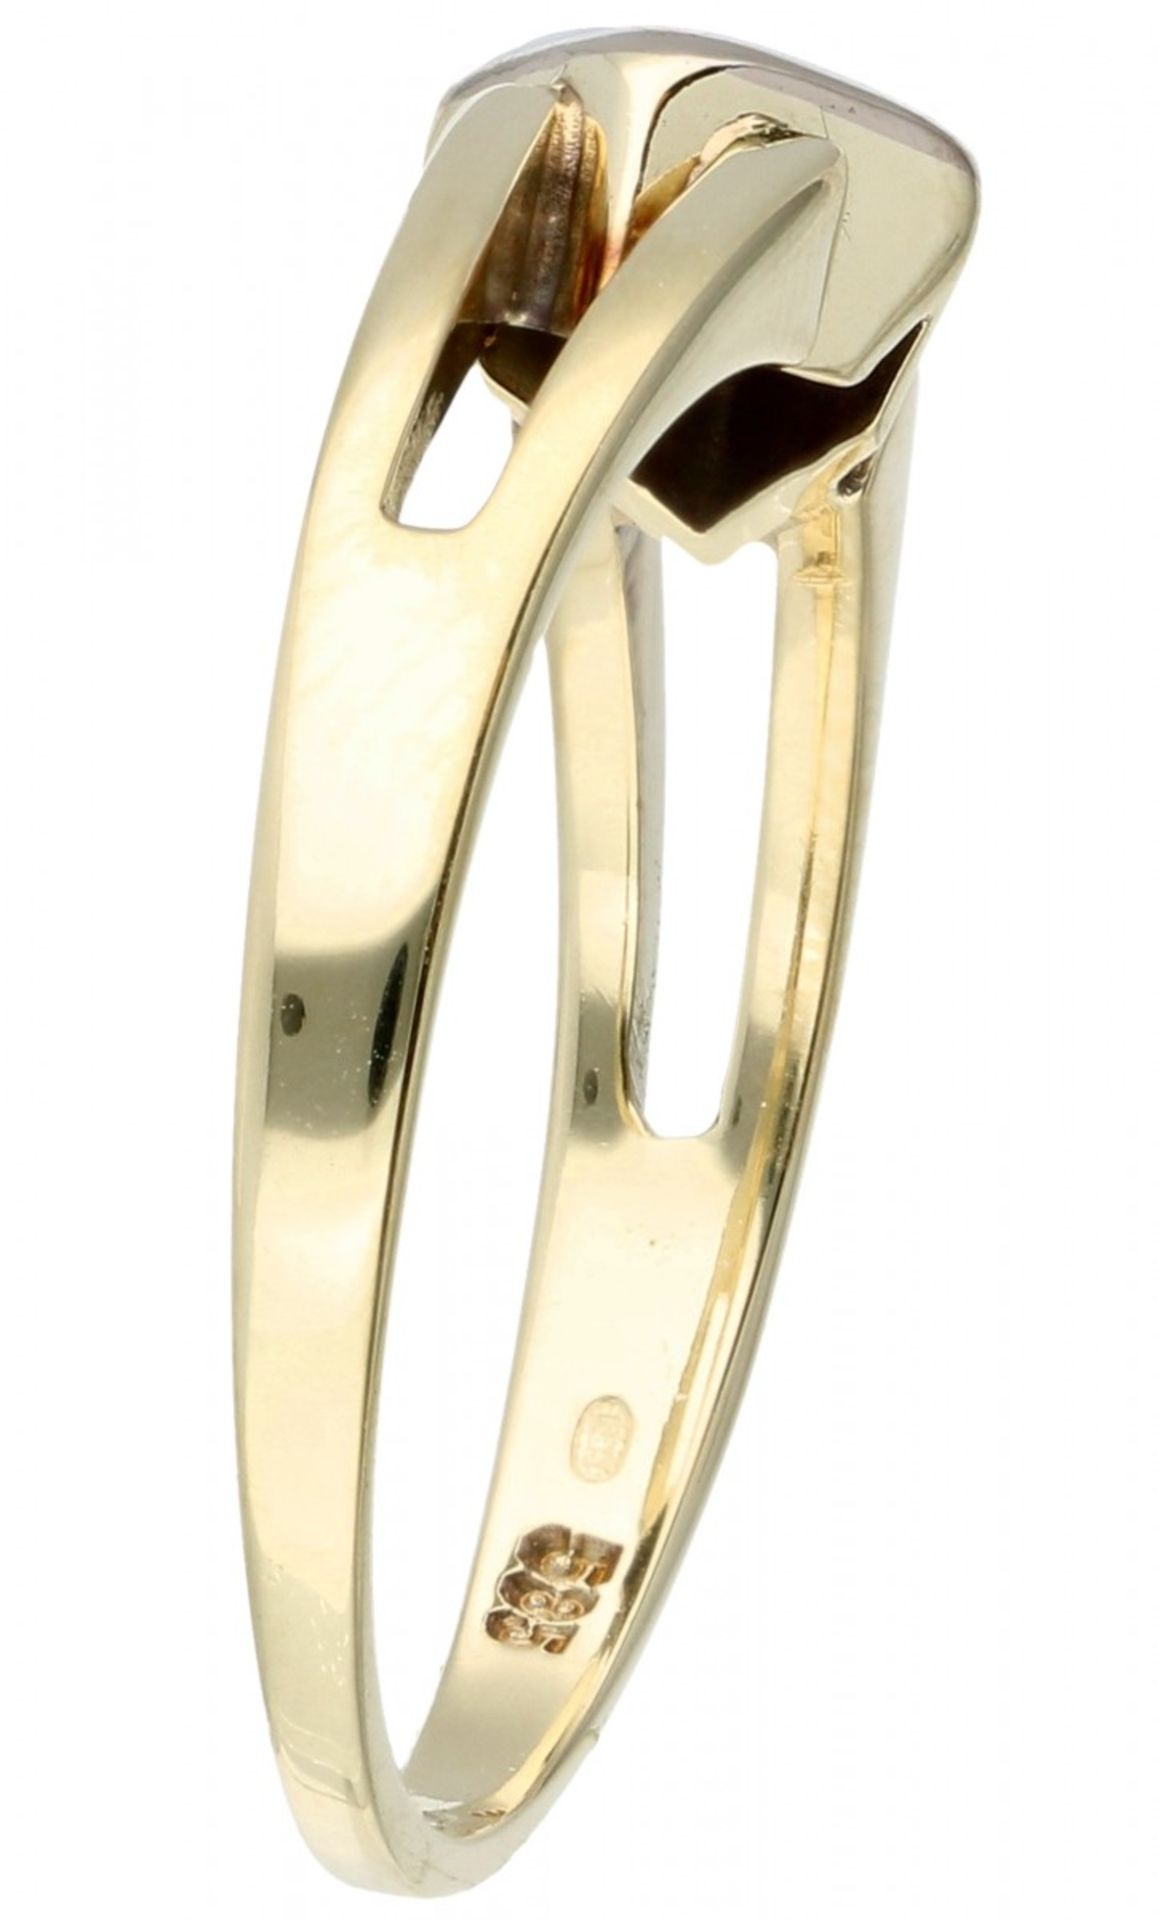 Yellow gold solitaire ring set with approx. 0.05 ct. diamond - 14 ct. - Image 2 of 2